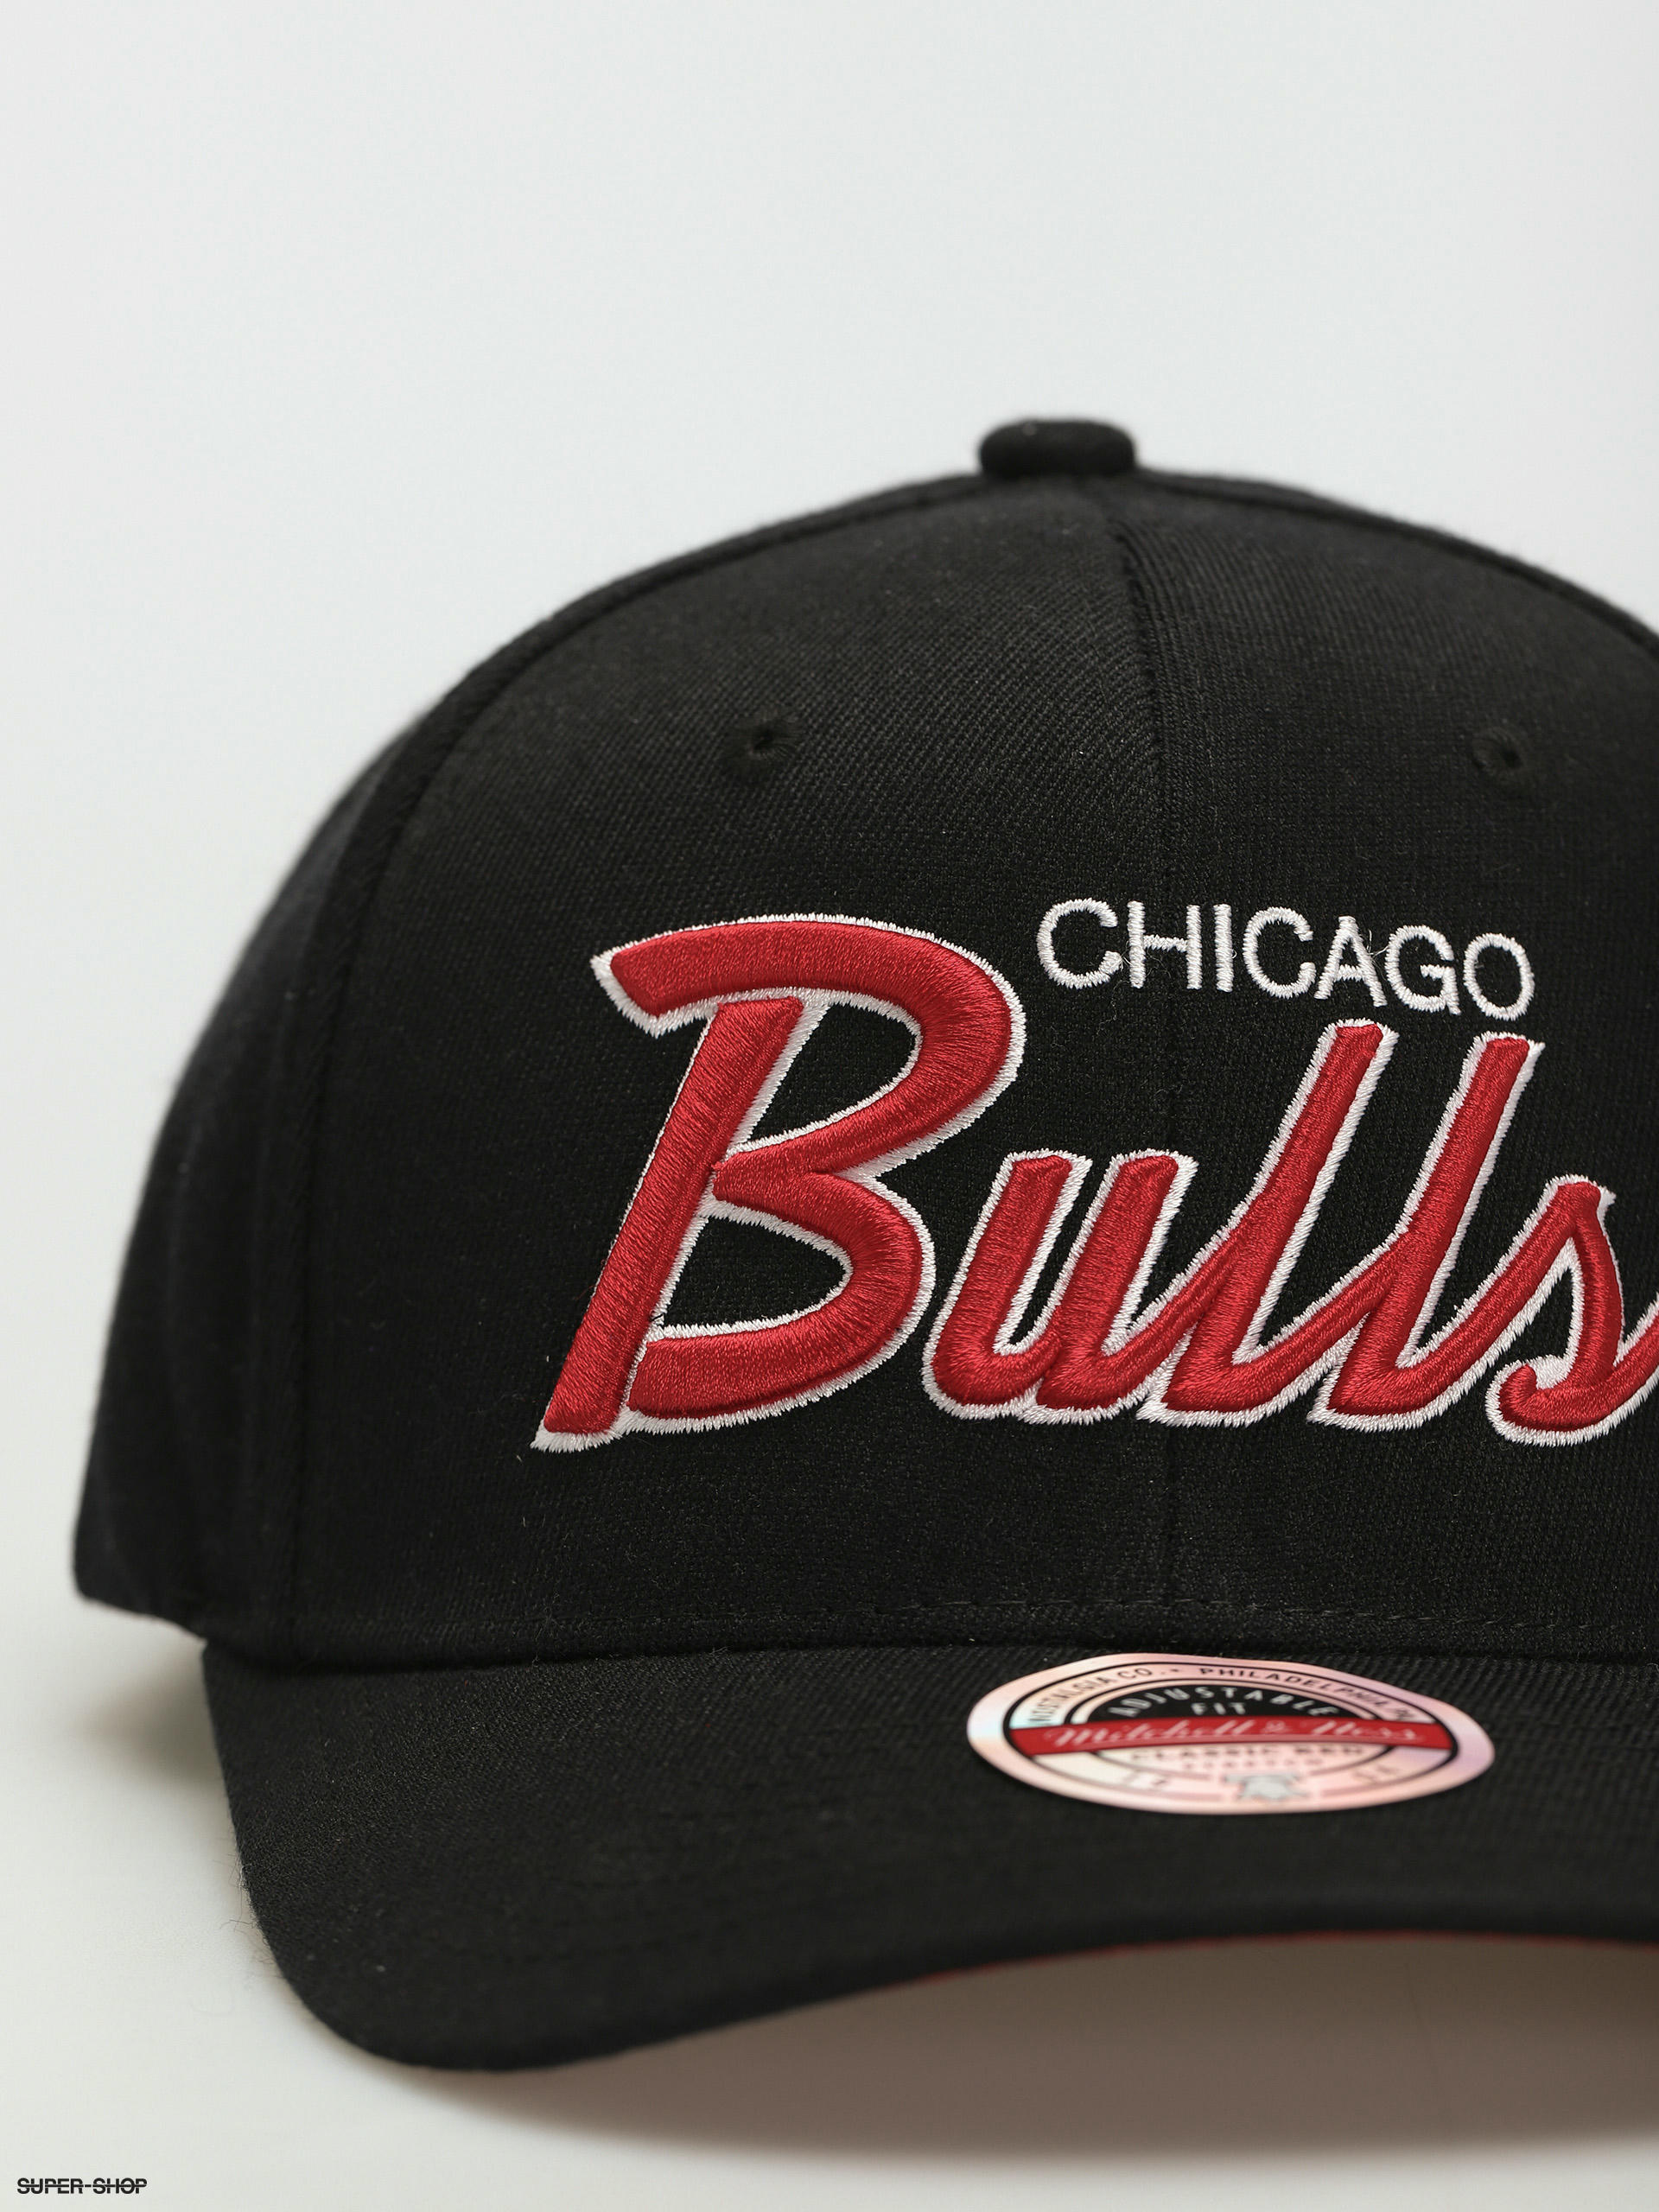 Mitchell & Ness on X: Coming soon to our website is the Chicago